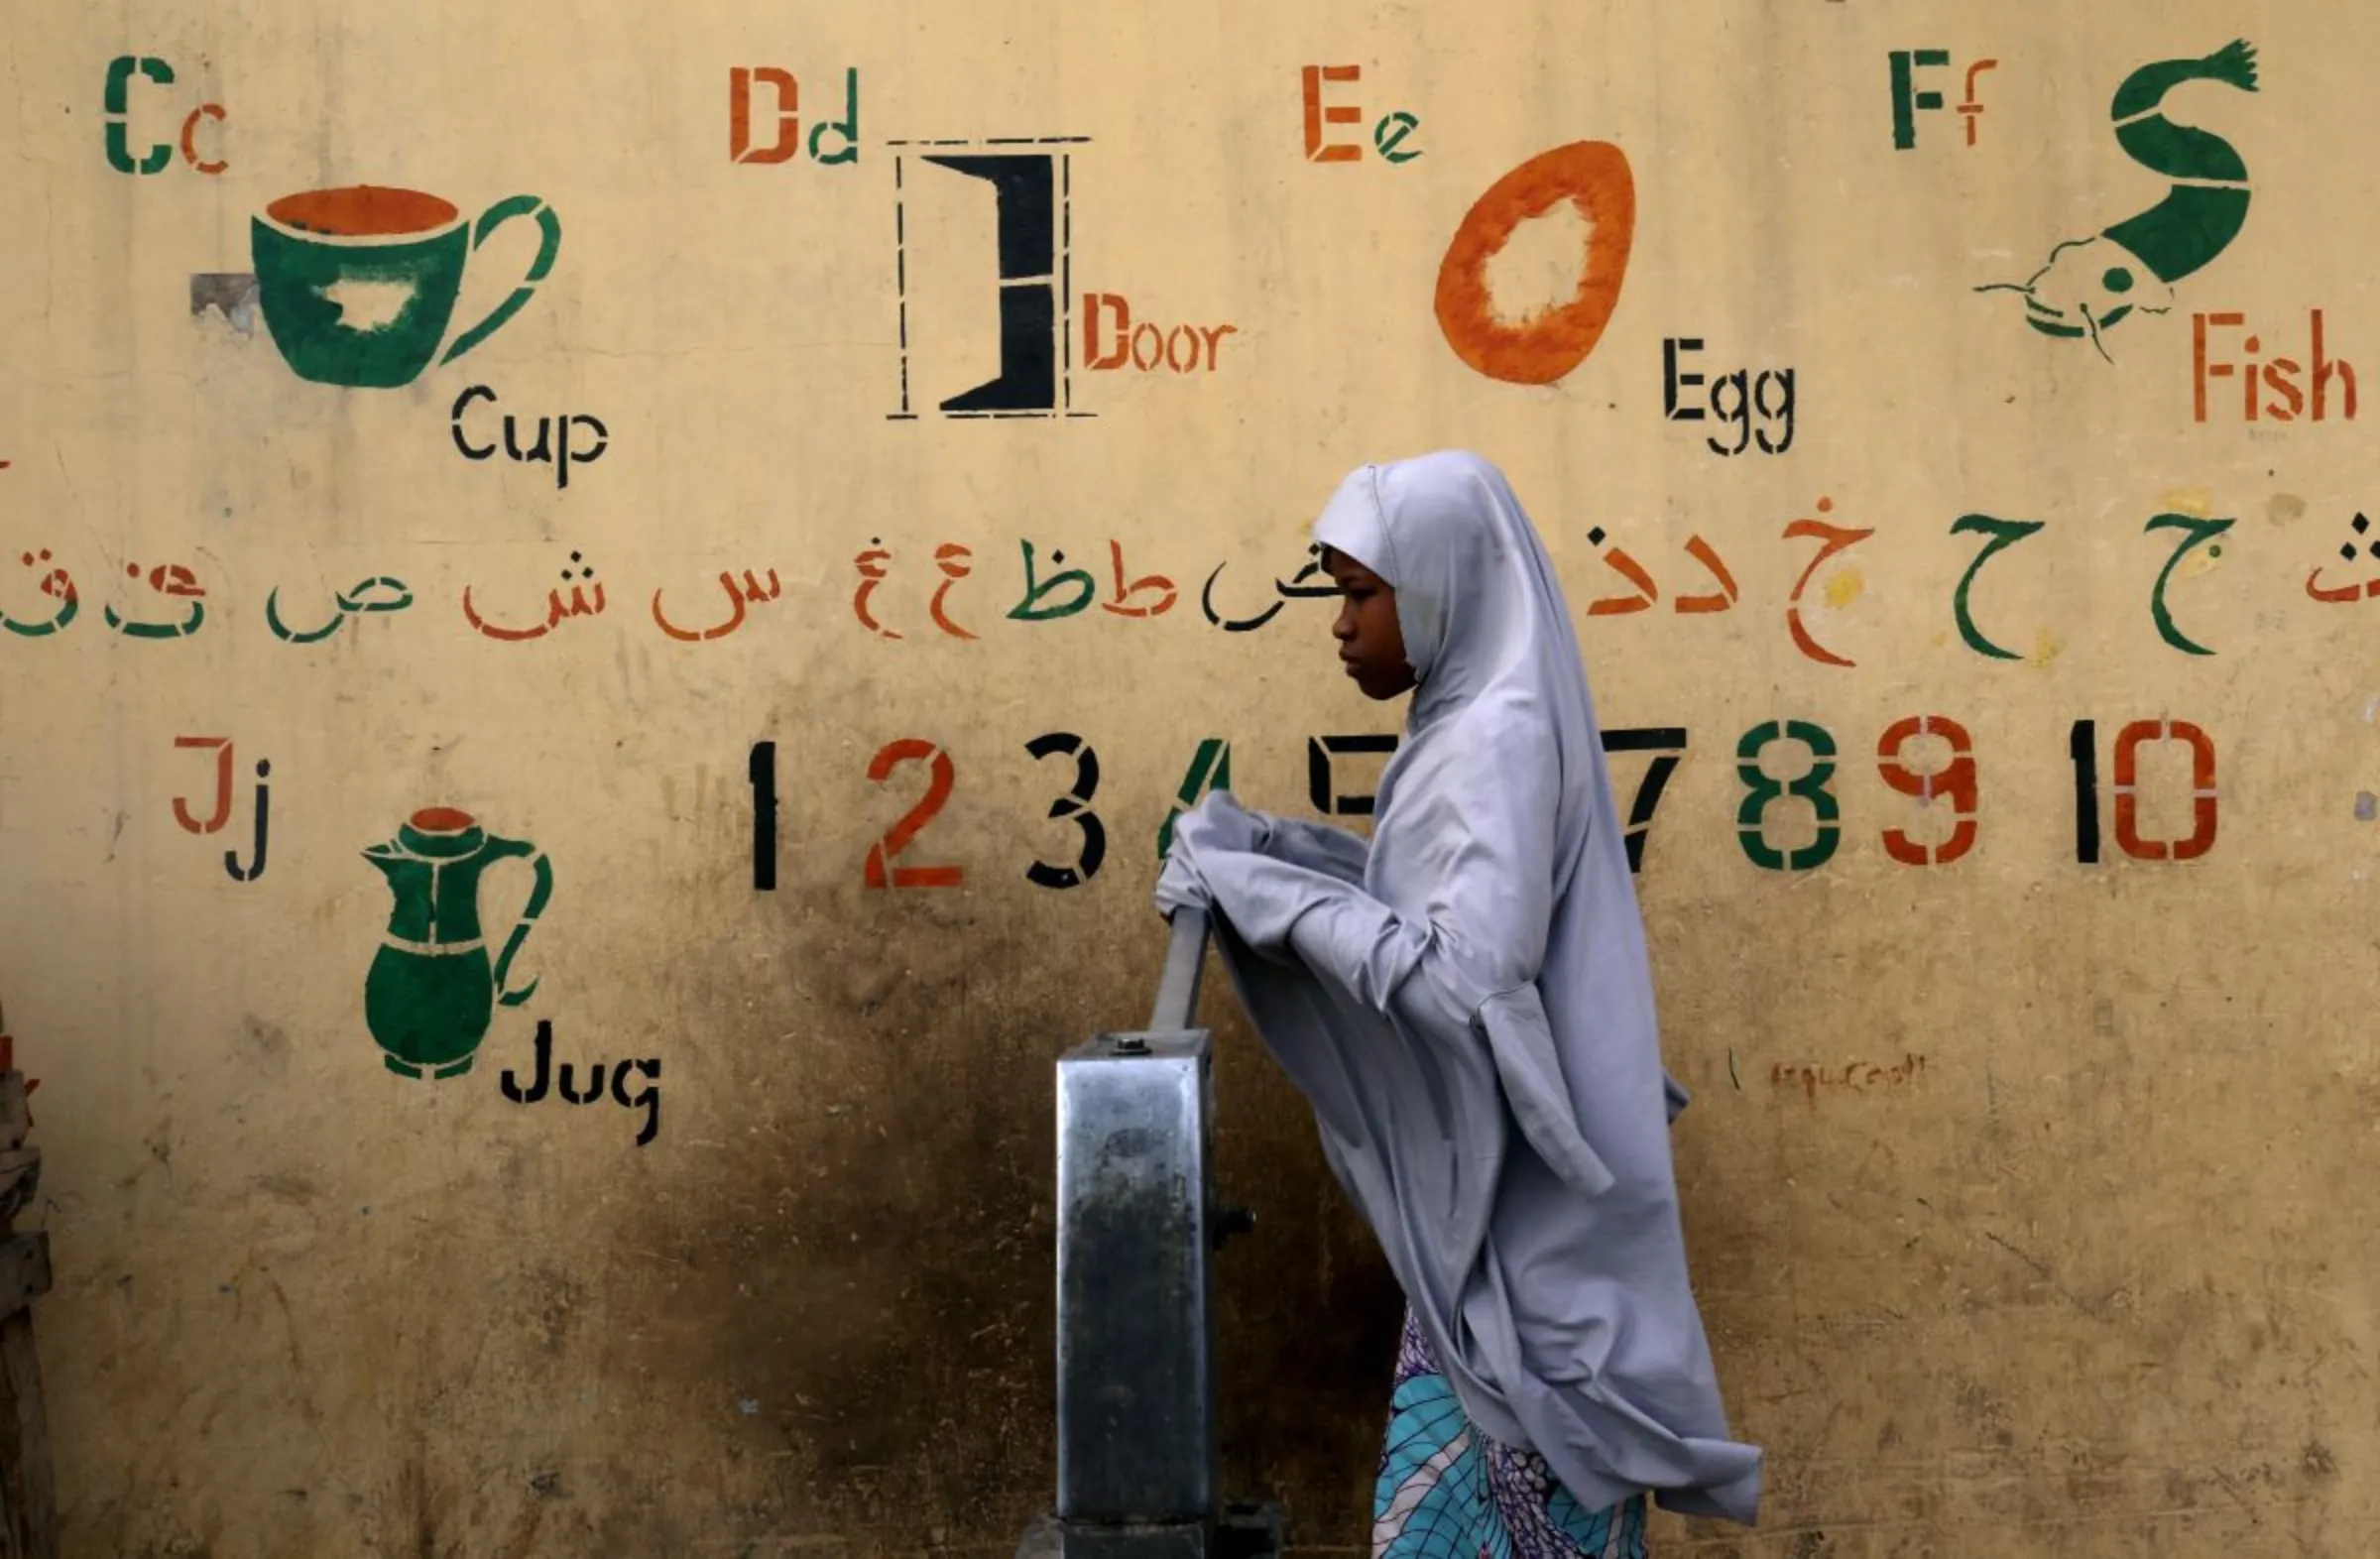 A girl draws water from a fountain in Kano, Nigeria February 17, 2019. REUTERS/Luc Gnago